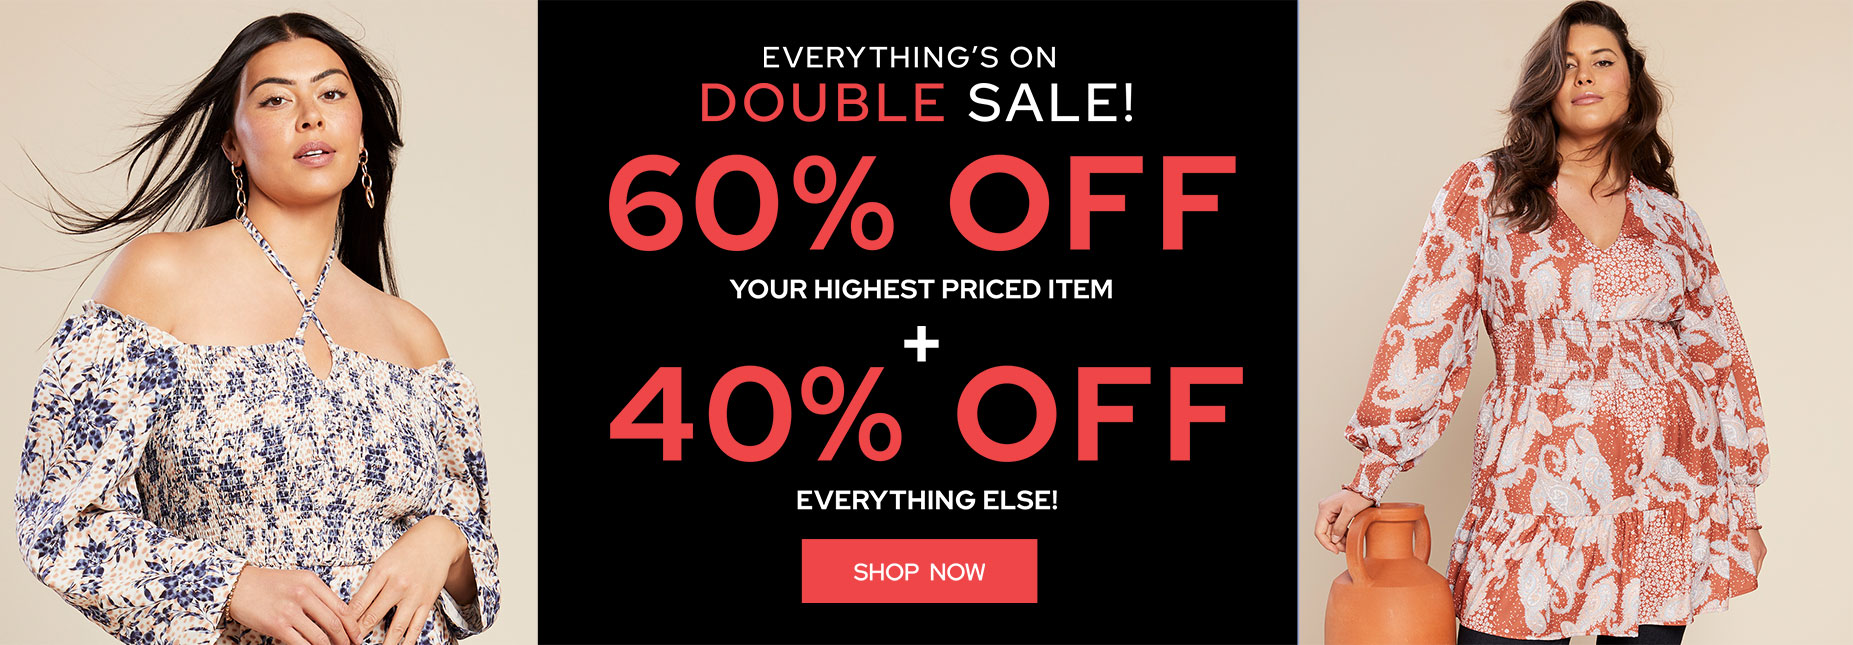 Everything's on double sale! 60% off your highest priced item plus 40% off everything else!